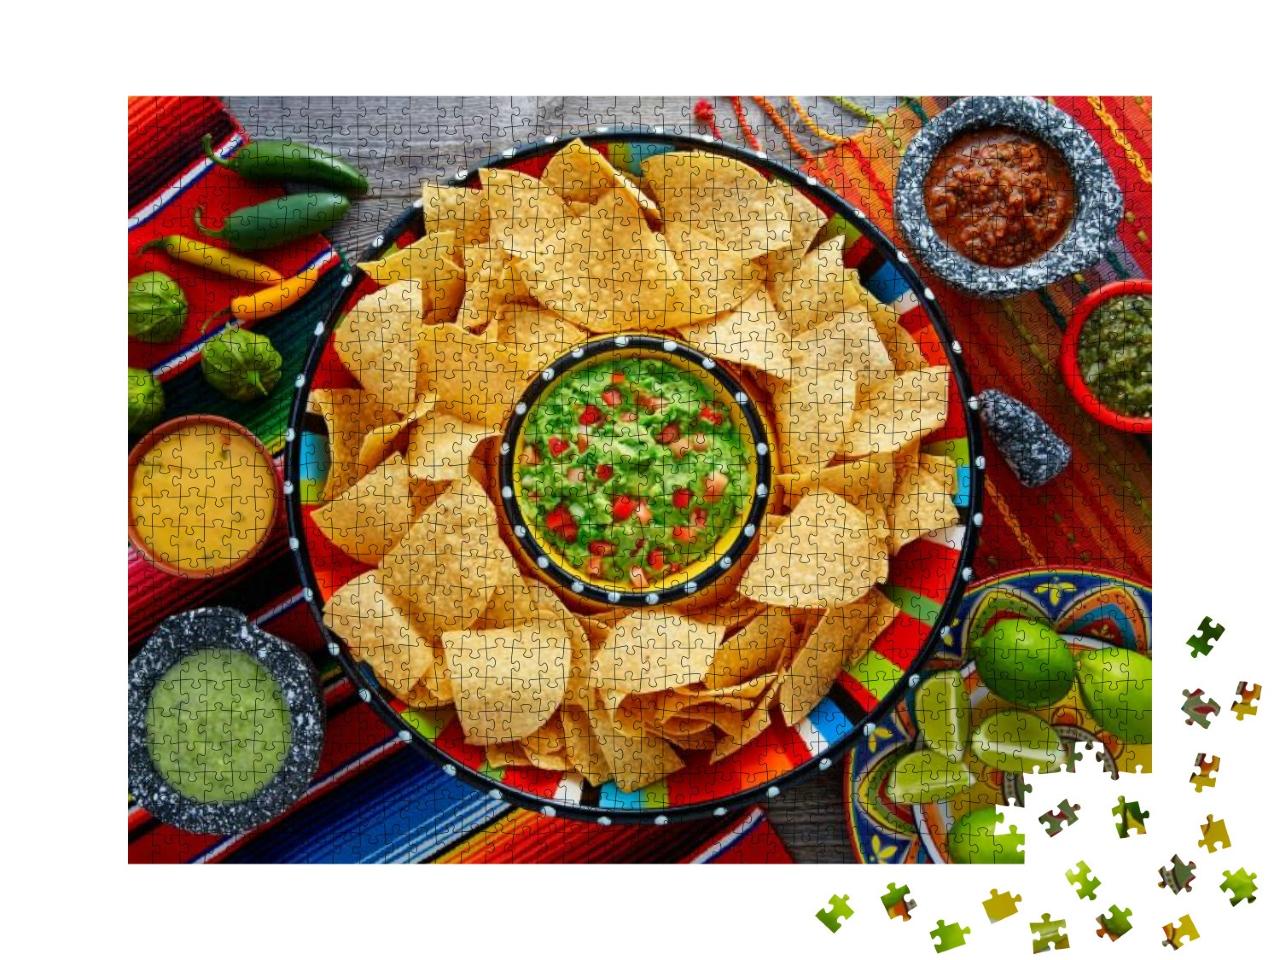 Nachos with Guacamole Tortilla Chips in Sombrero Plate &... Jigsaw Puzzle with 1000 pieces